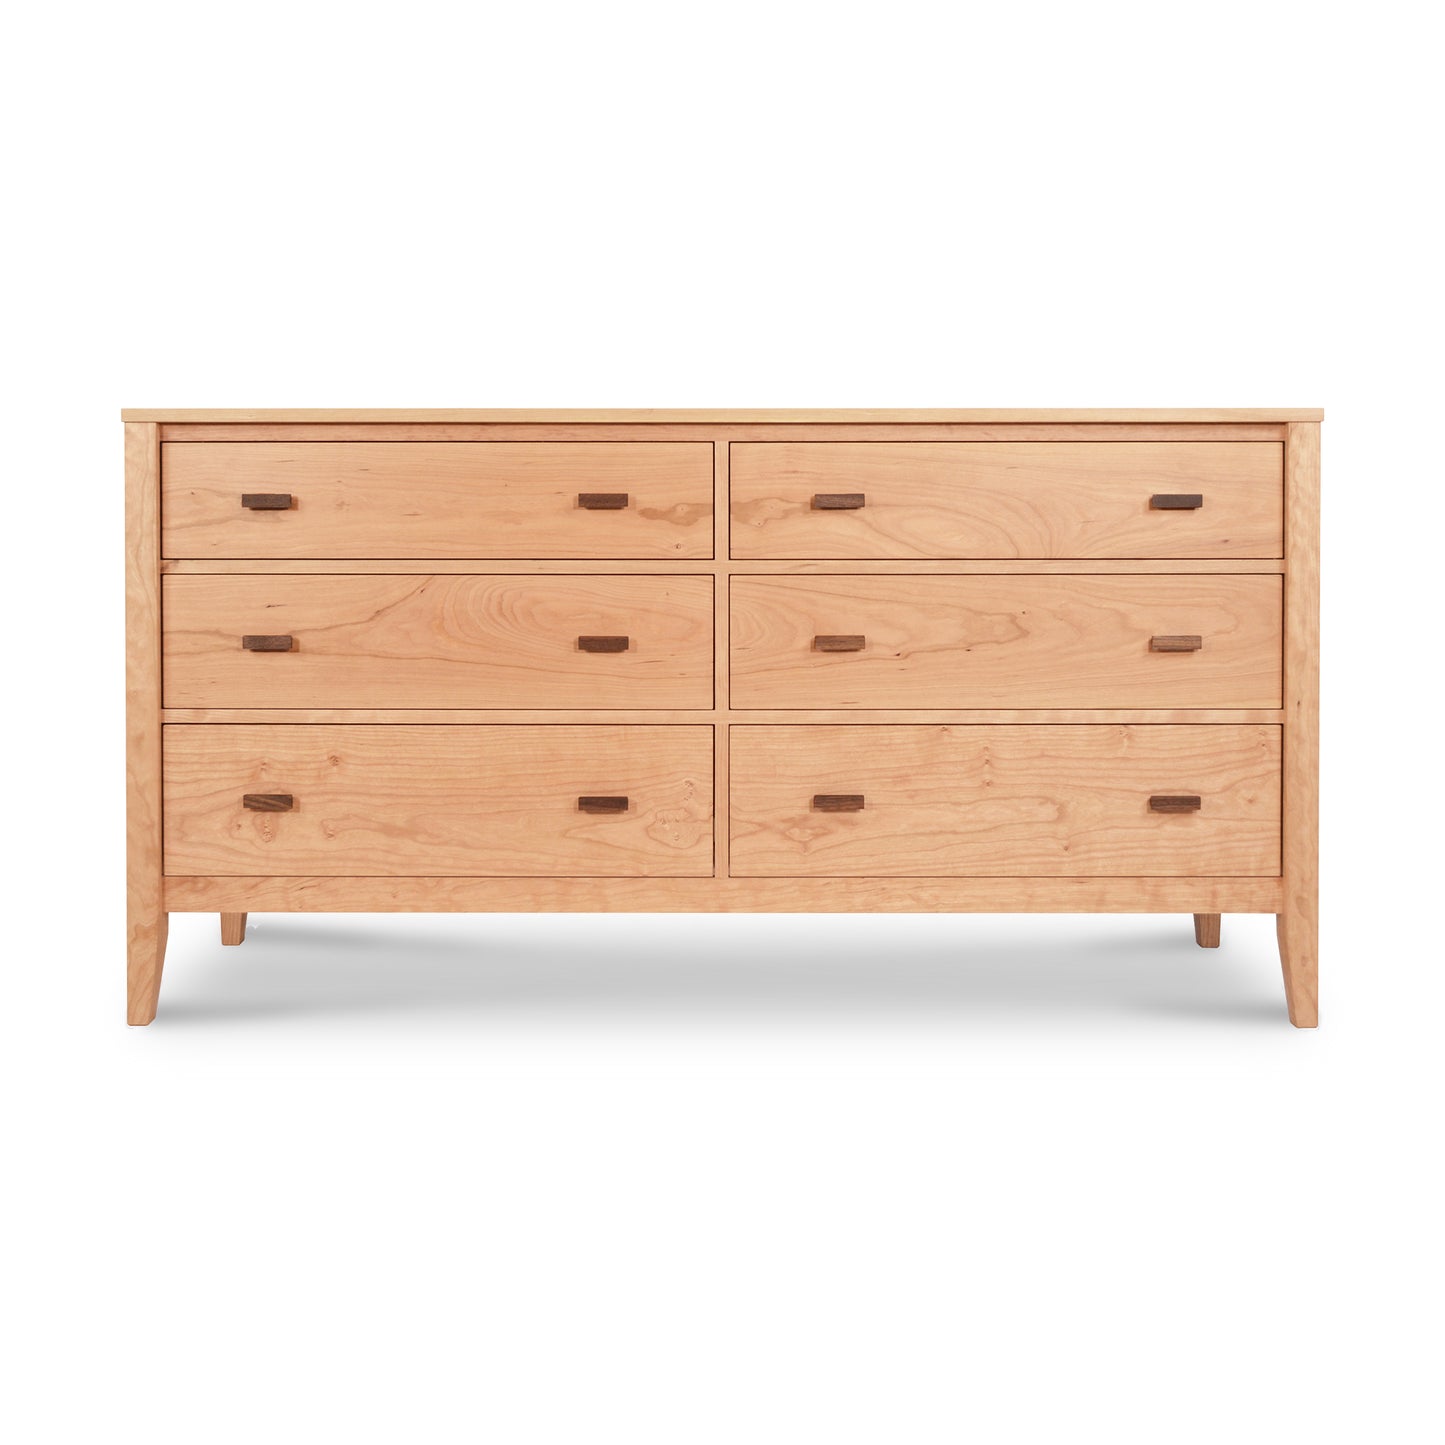 An Maple Corner Woodworks Andover Modern 6-Drawer Dresser with precision dovetail drawer construction.